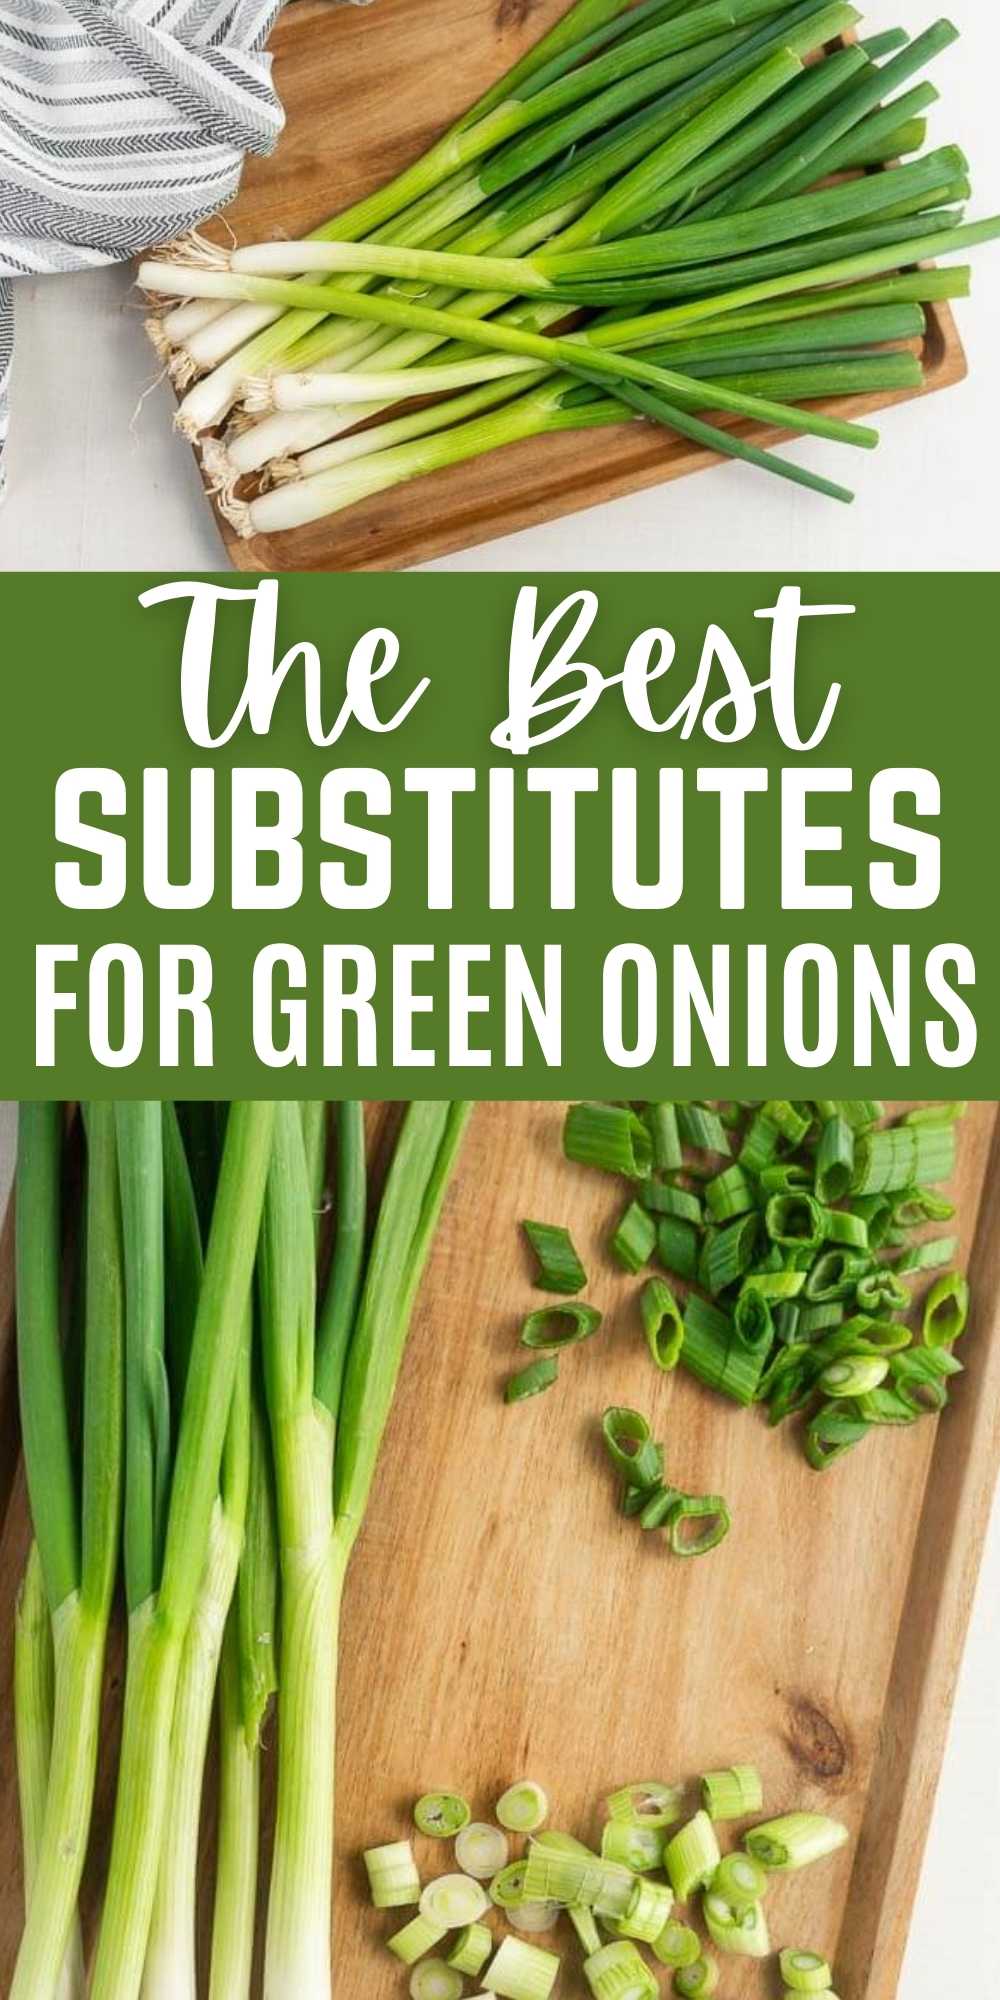 What Can I Substitute for Onions in My Recipes? Here Are 13 Great